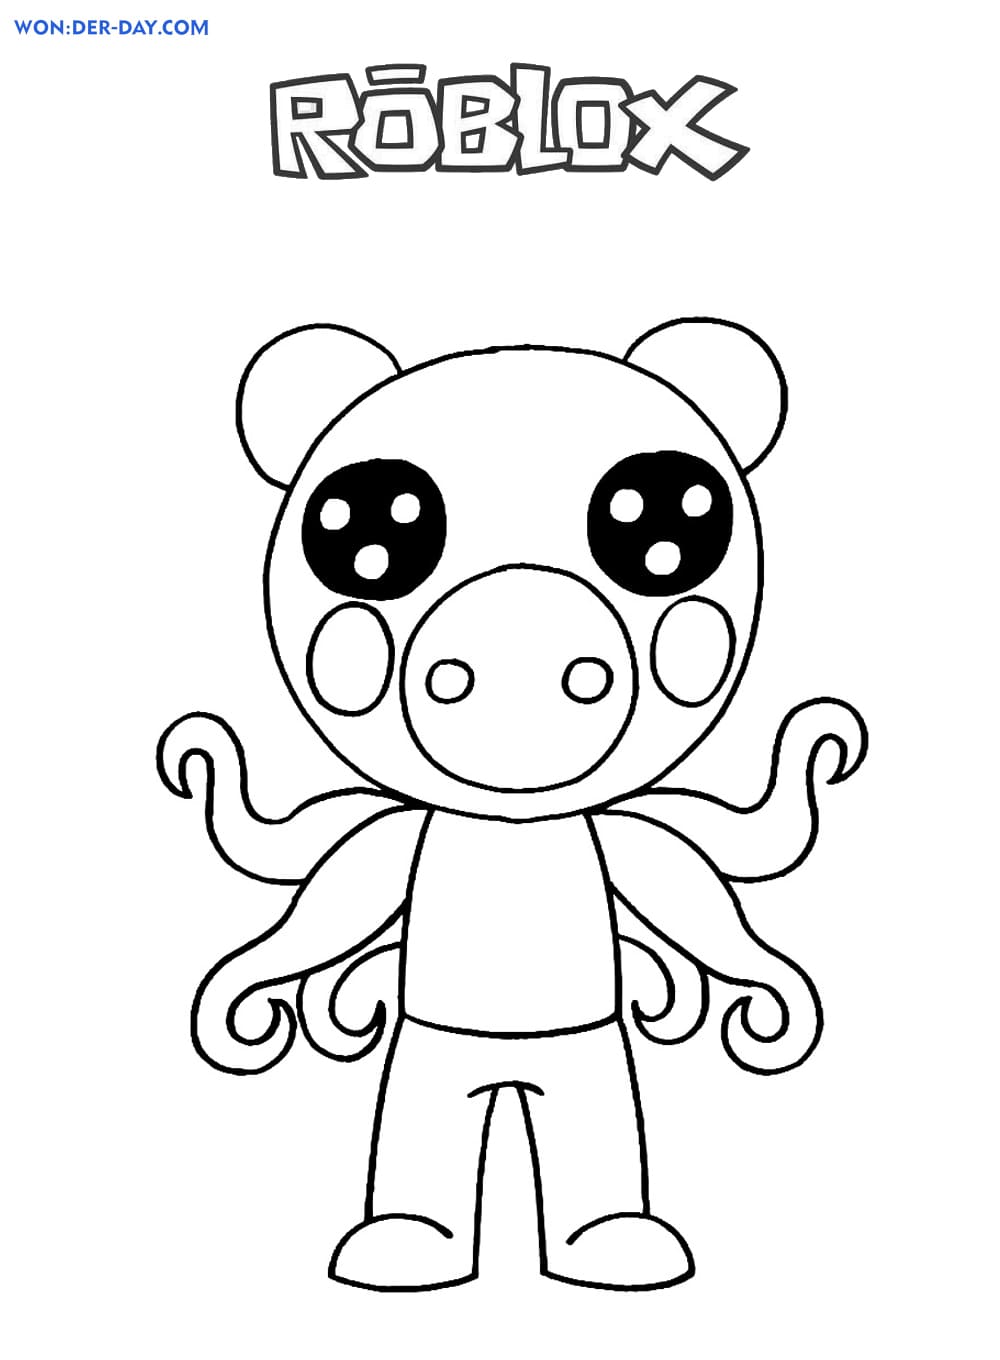 Piggy Roblox coloring pages | WONDER DAY — Coloring pages for children ...